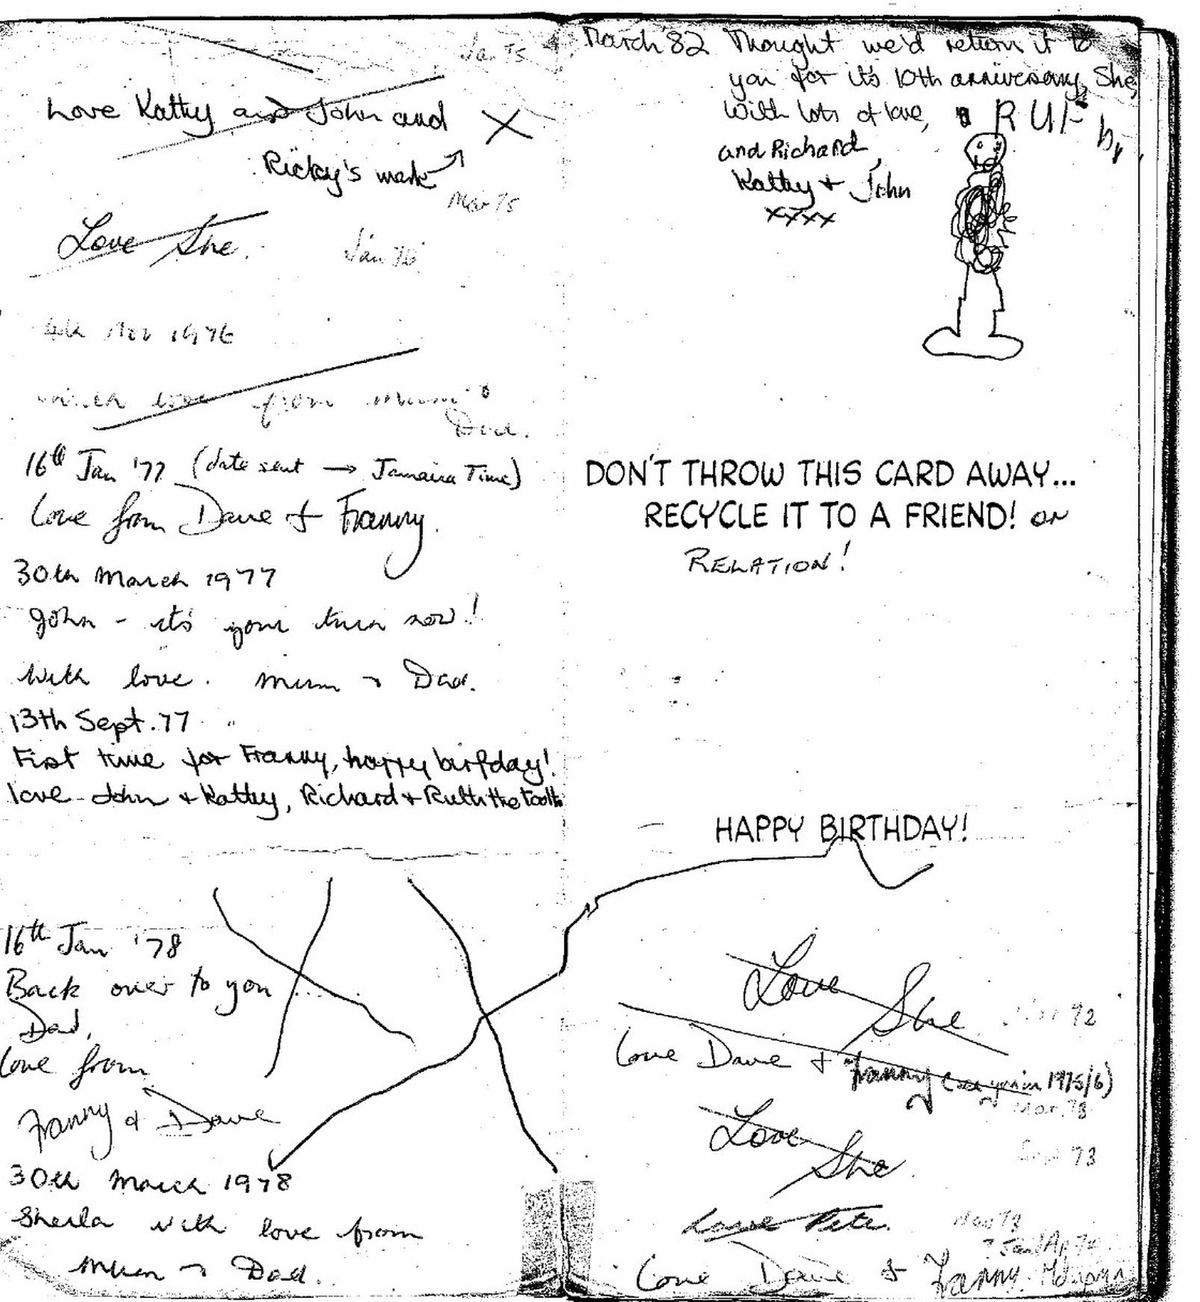 The original card was first sent almost 50 years ago on Dave Saunders's 21st birthday. (Kennedy News and Media)